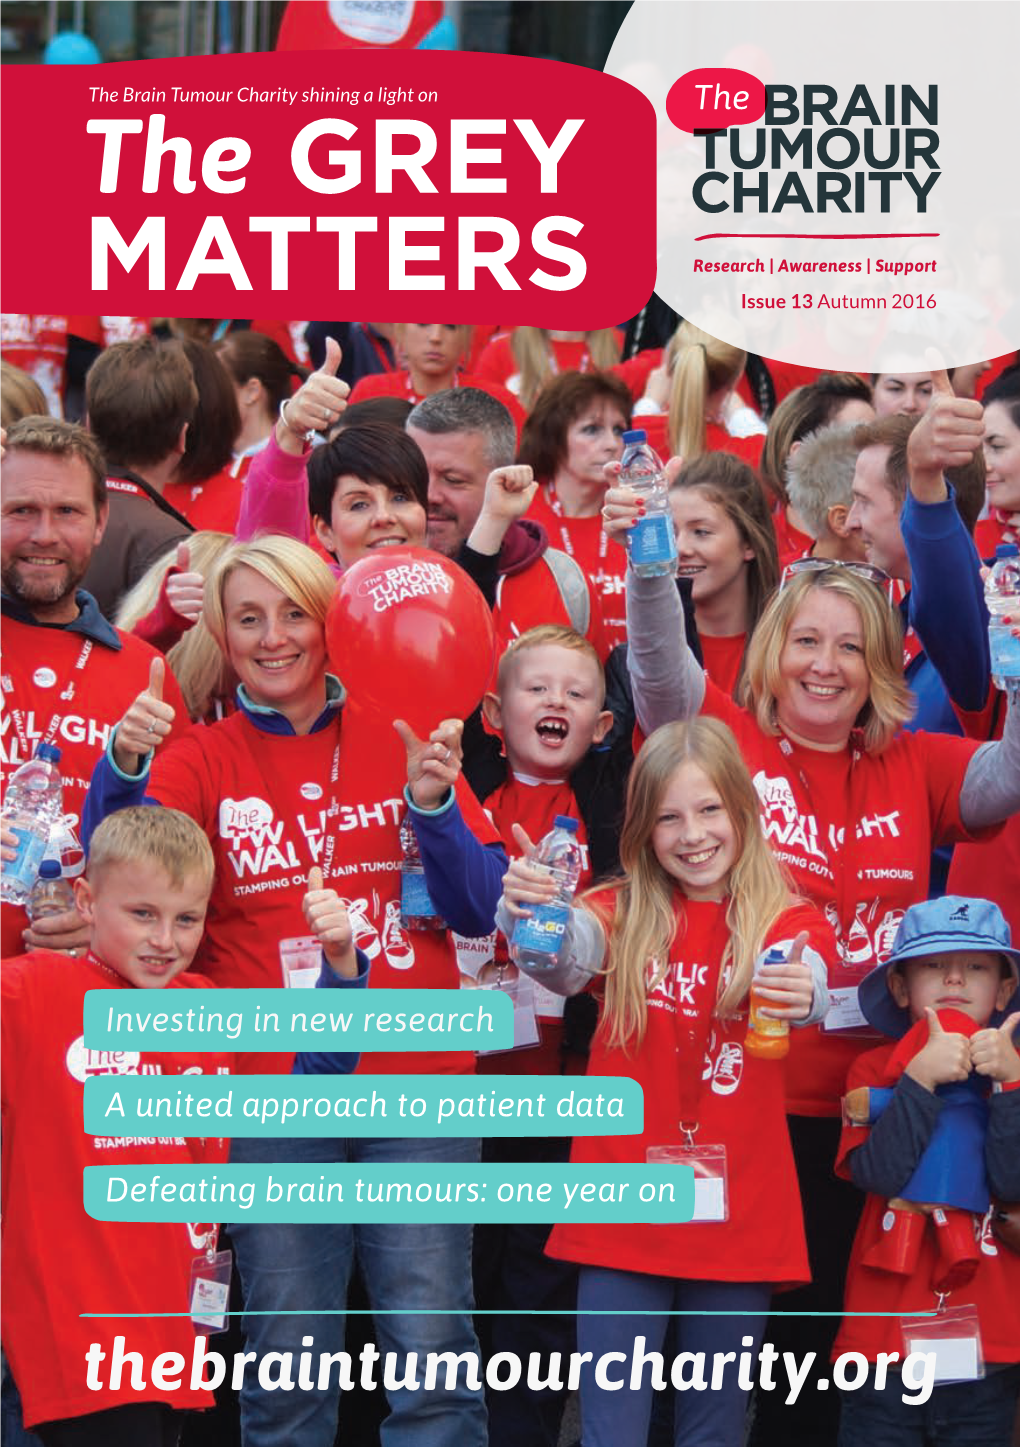 The GREY MATTERS Research | Awareness | Support Issue 13 Autumn 2016